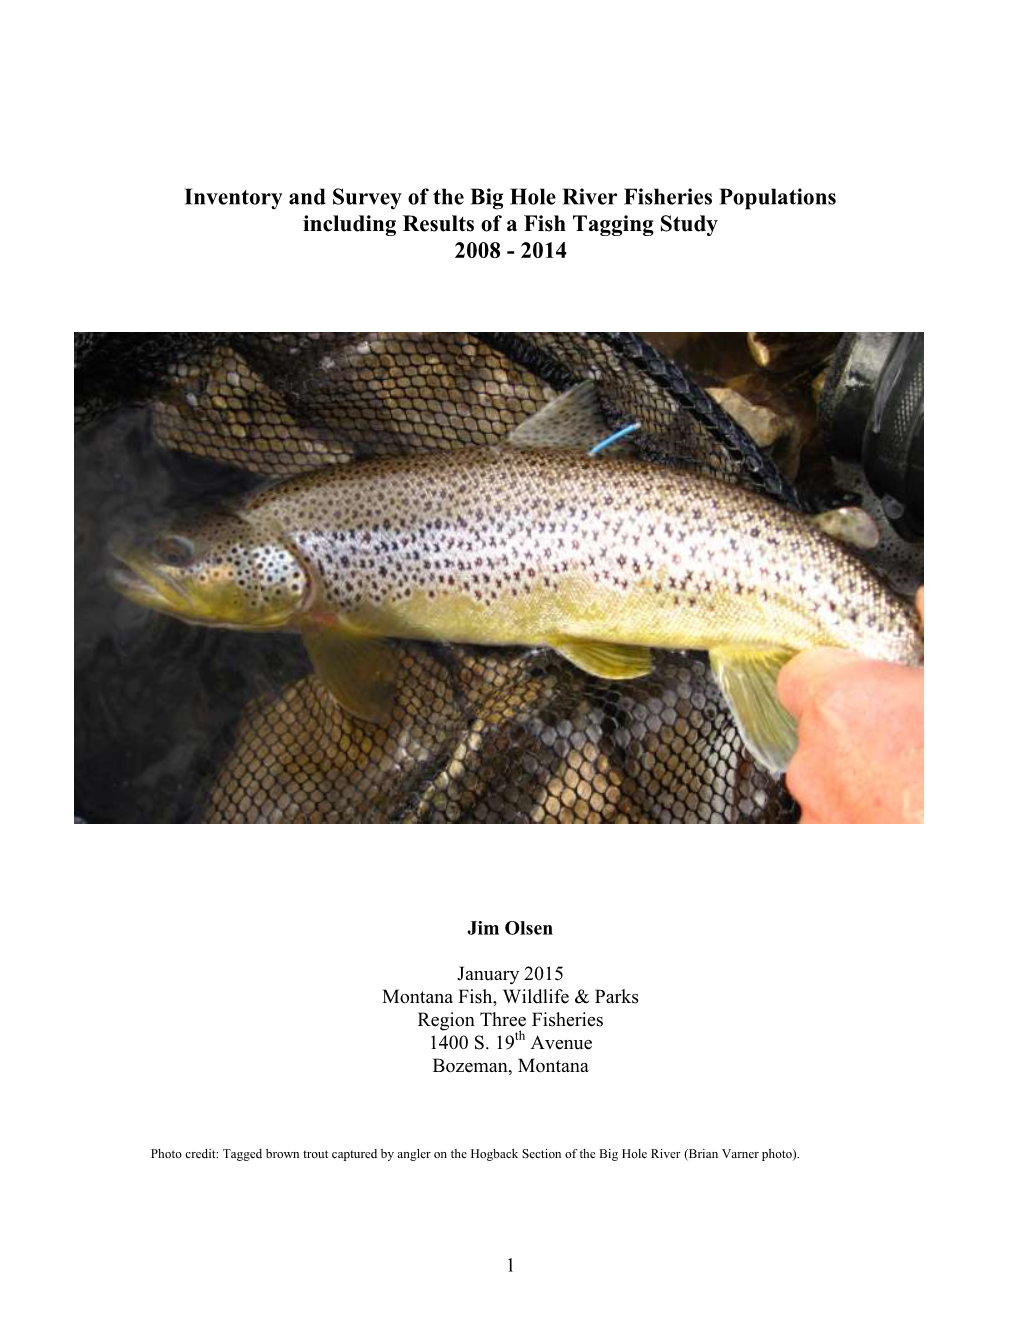 Inventory and Survey of the Big Hole River Fisheries Populations Including Results of a Fish Tagging Study 2008 - 2014